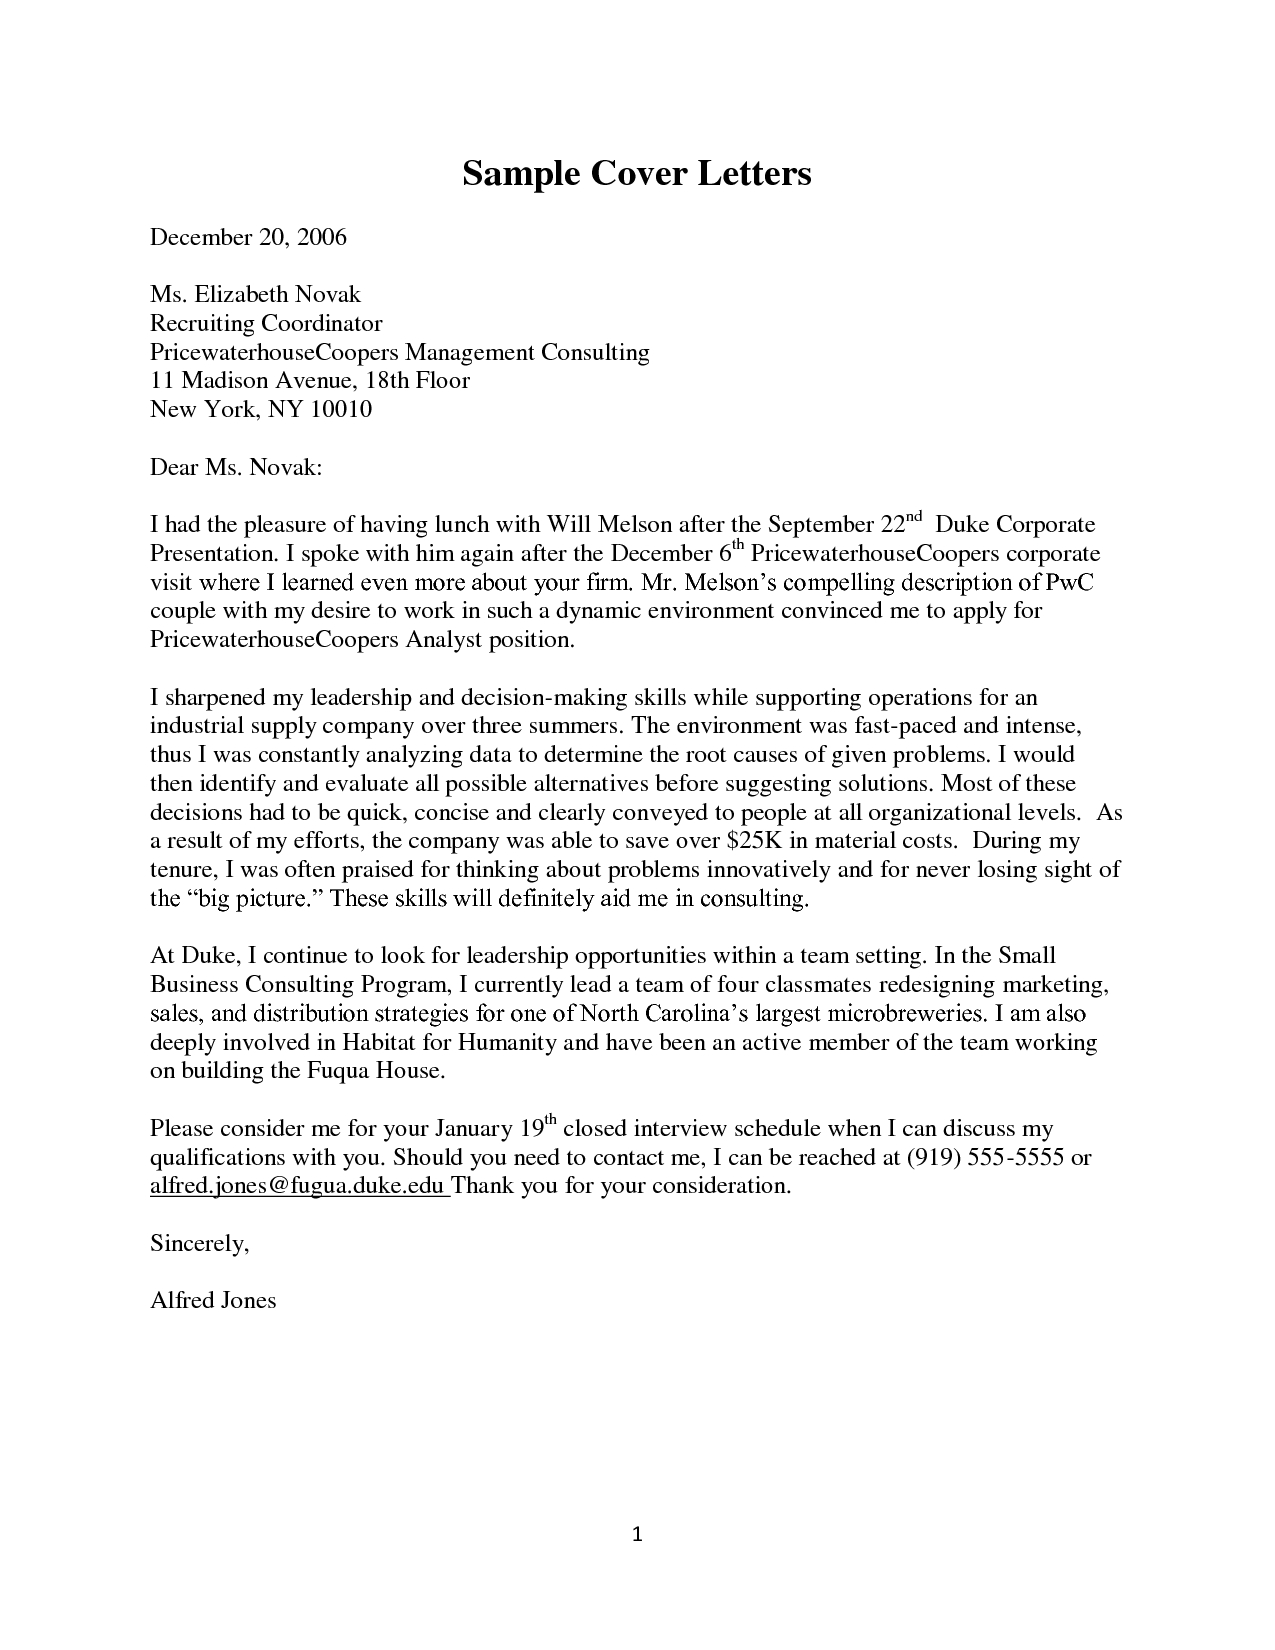 Amazon Appeal Letter Template - Cover Letter Consulting Pwc for Sale Amazon Free Shipping Guide and